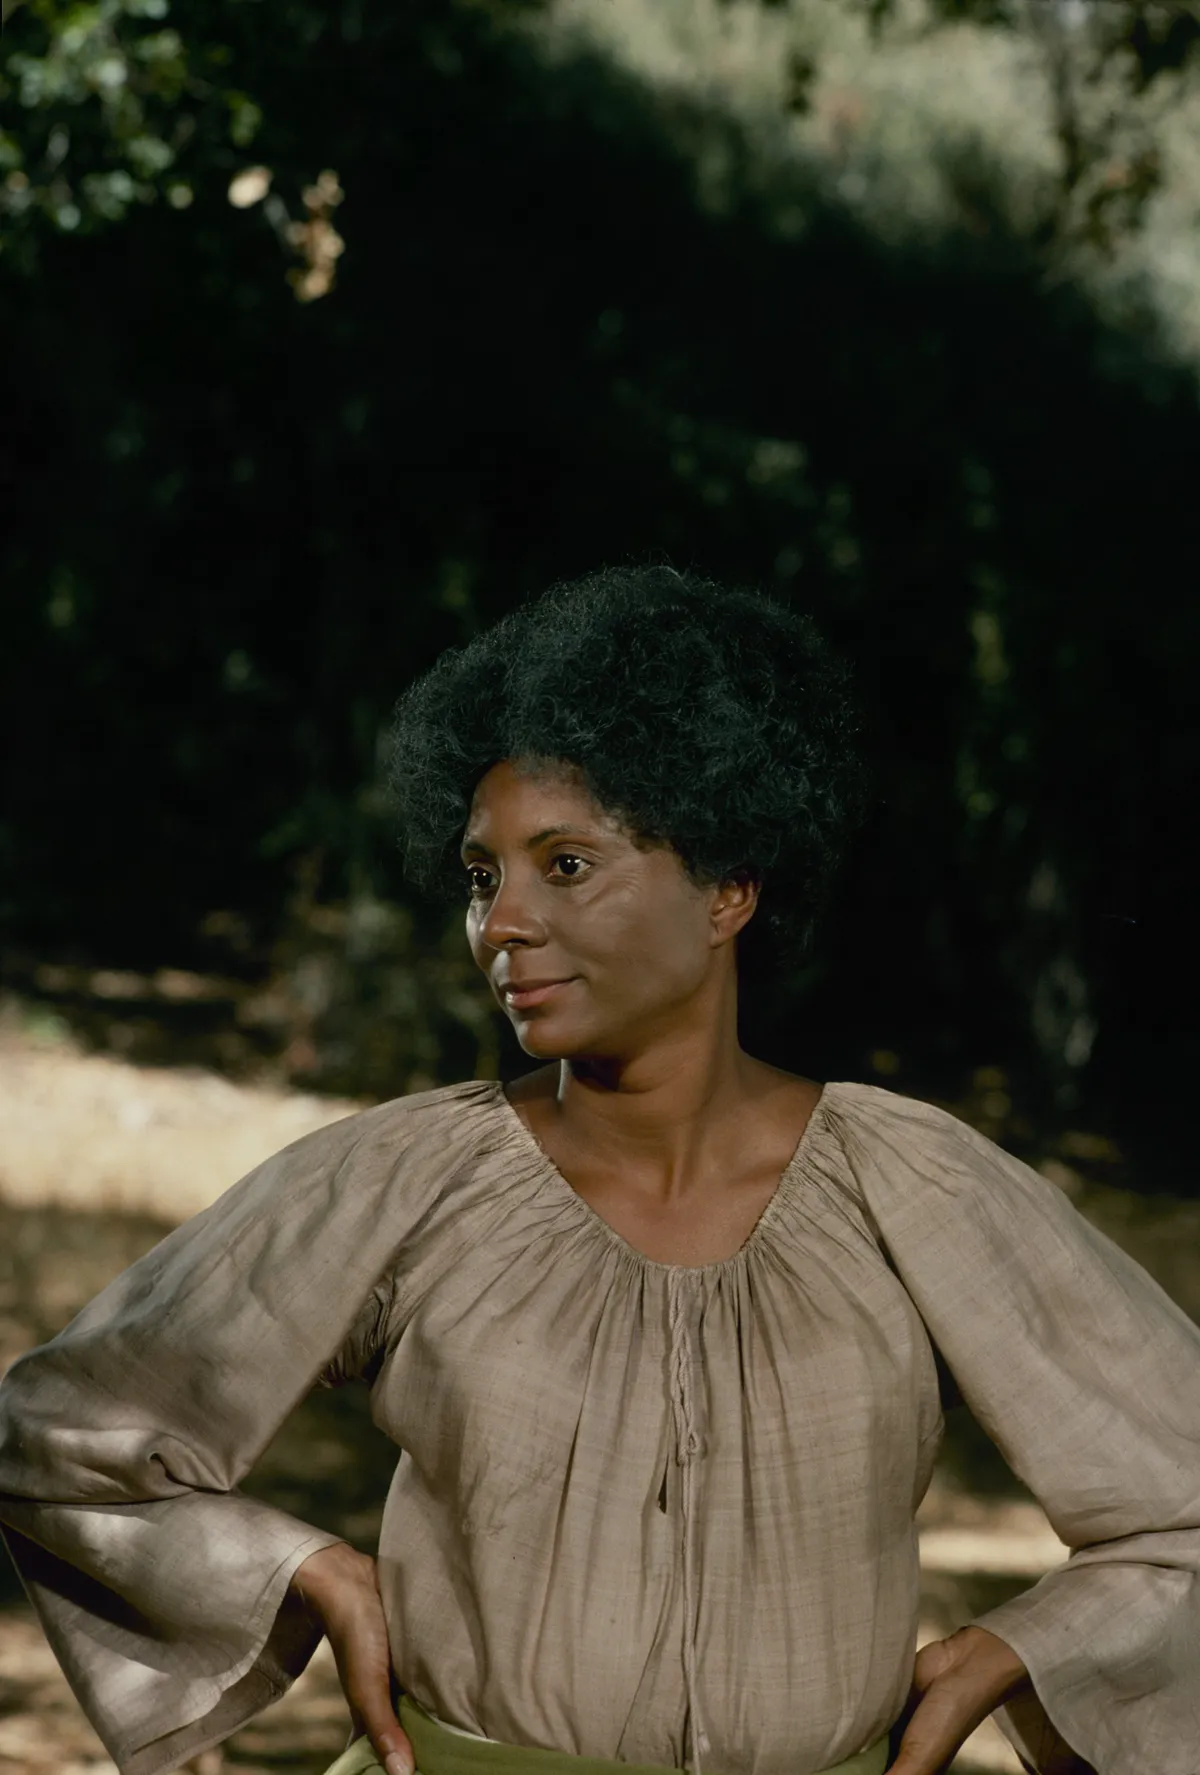 Leslie Uggams in "Roots" circa 1977. | Source: Getty Images